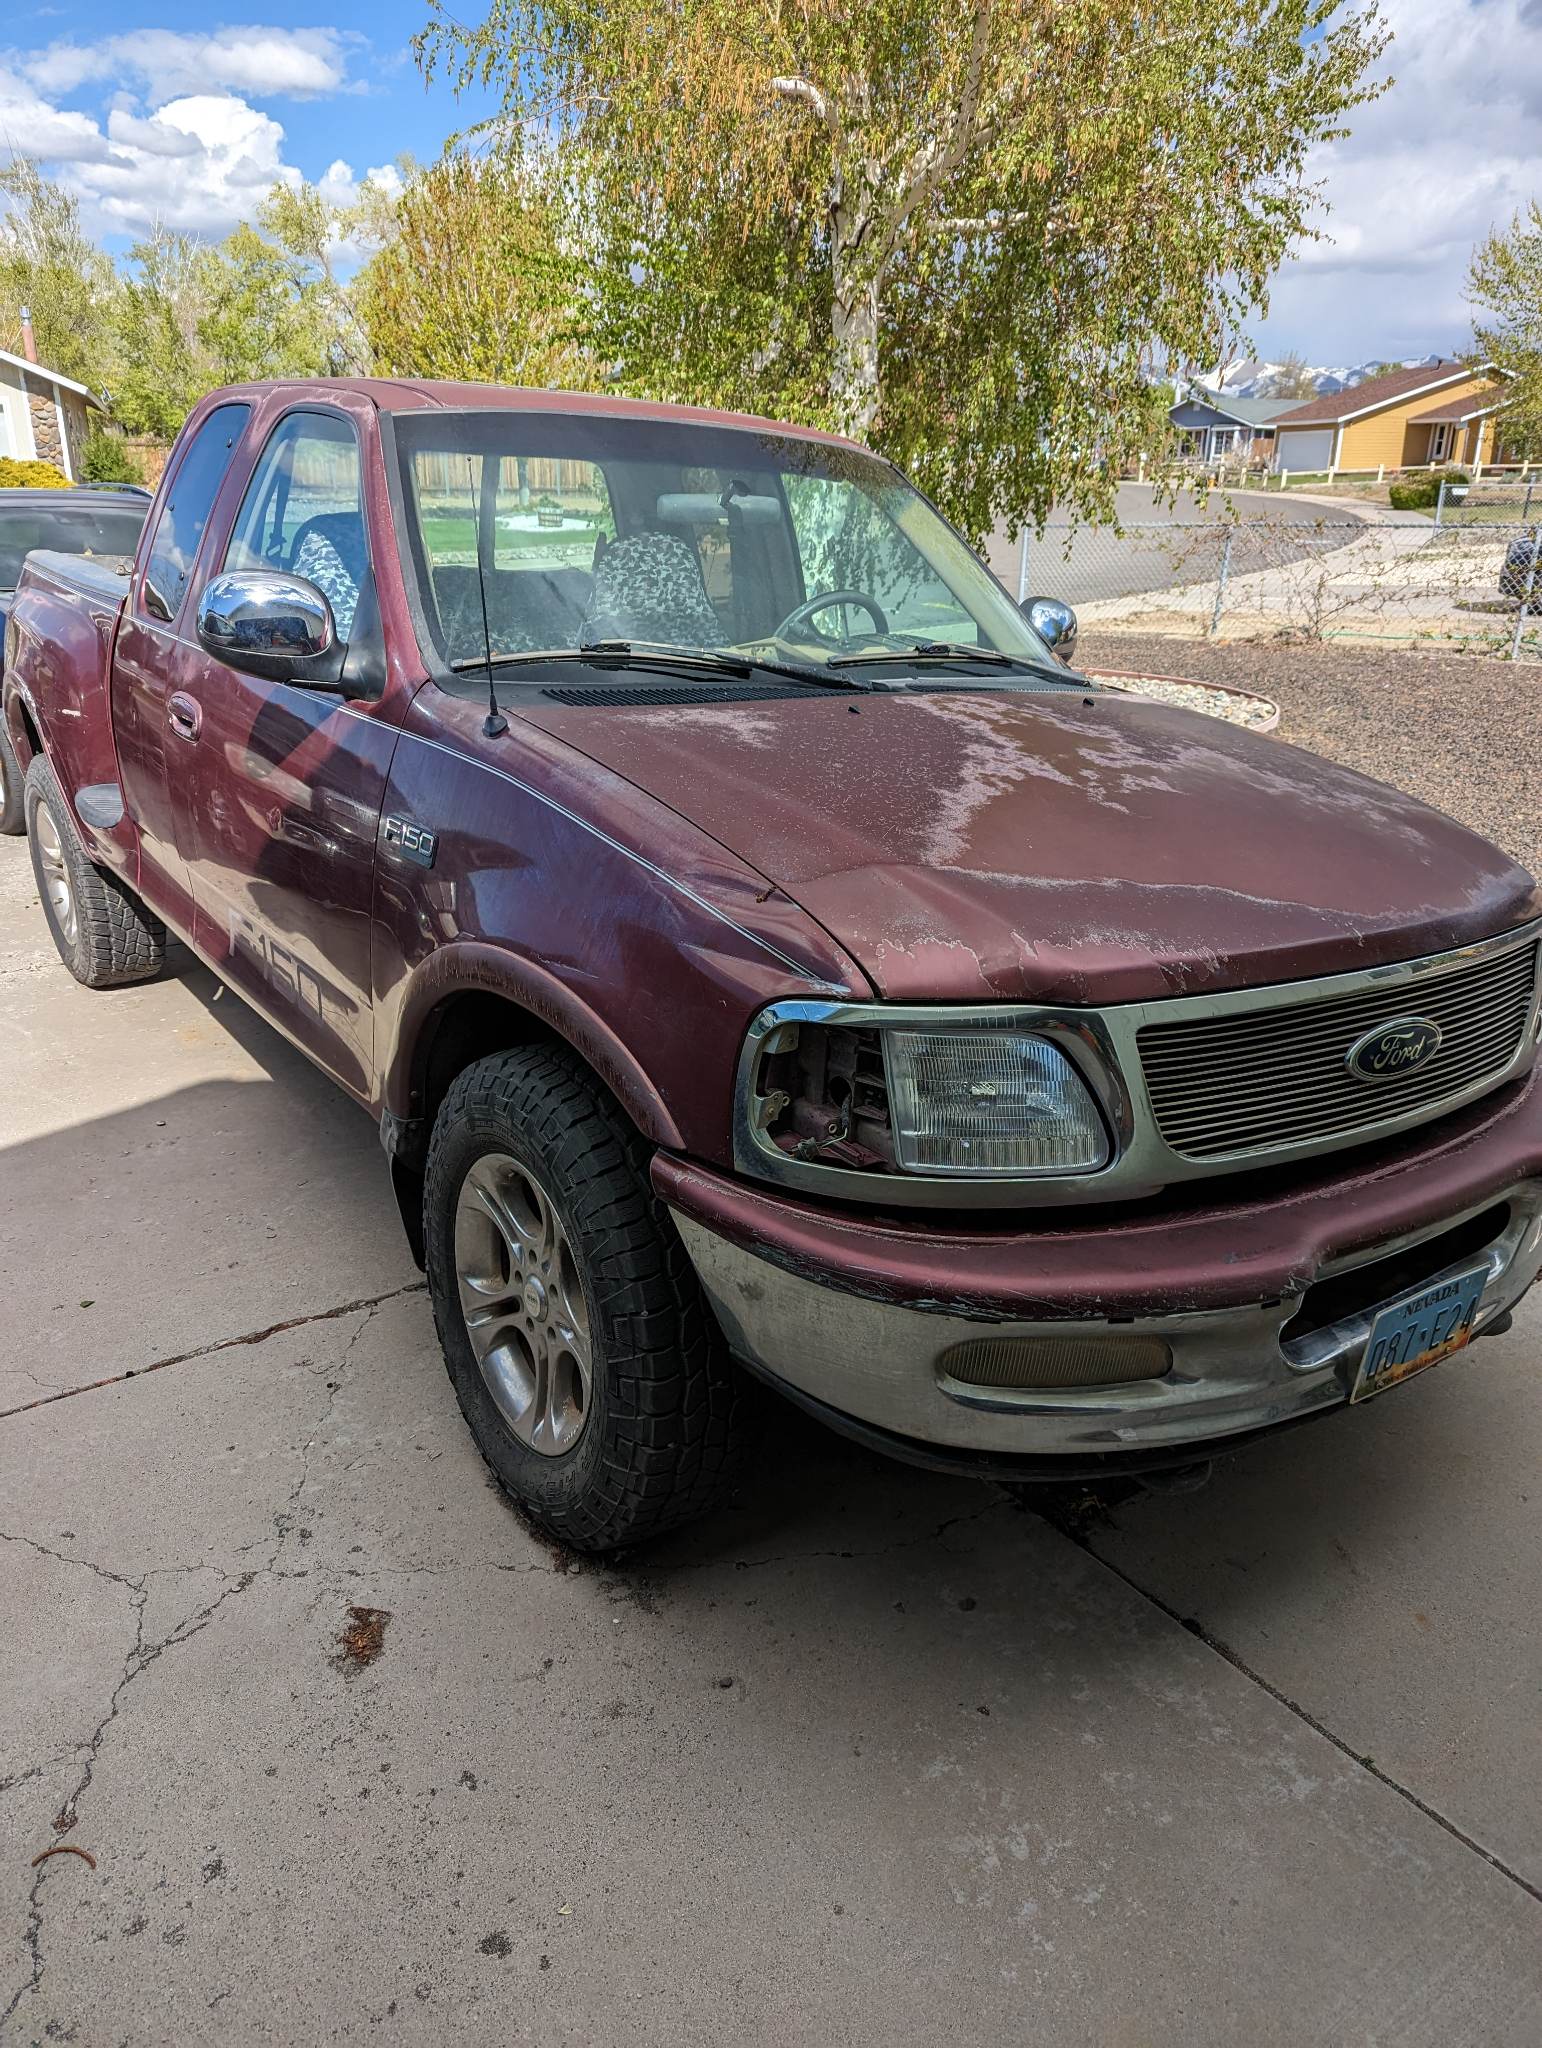 Used Trucks for Sale Under $2,500 Near Me